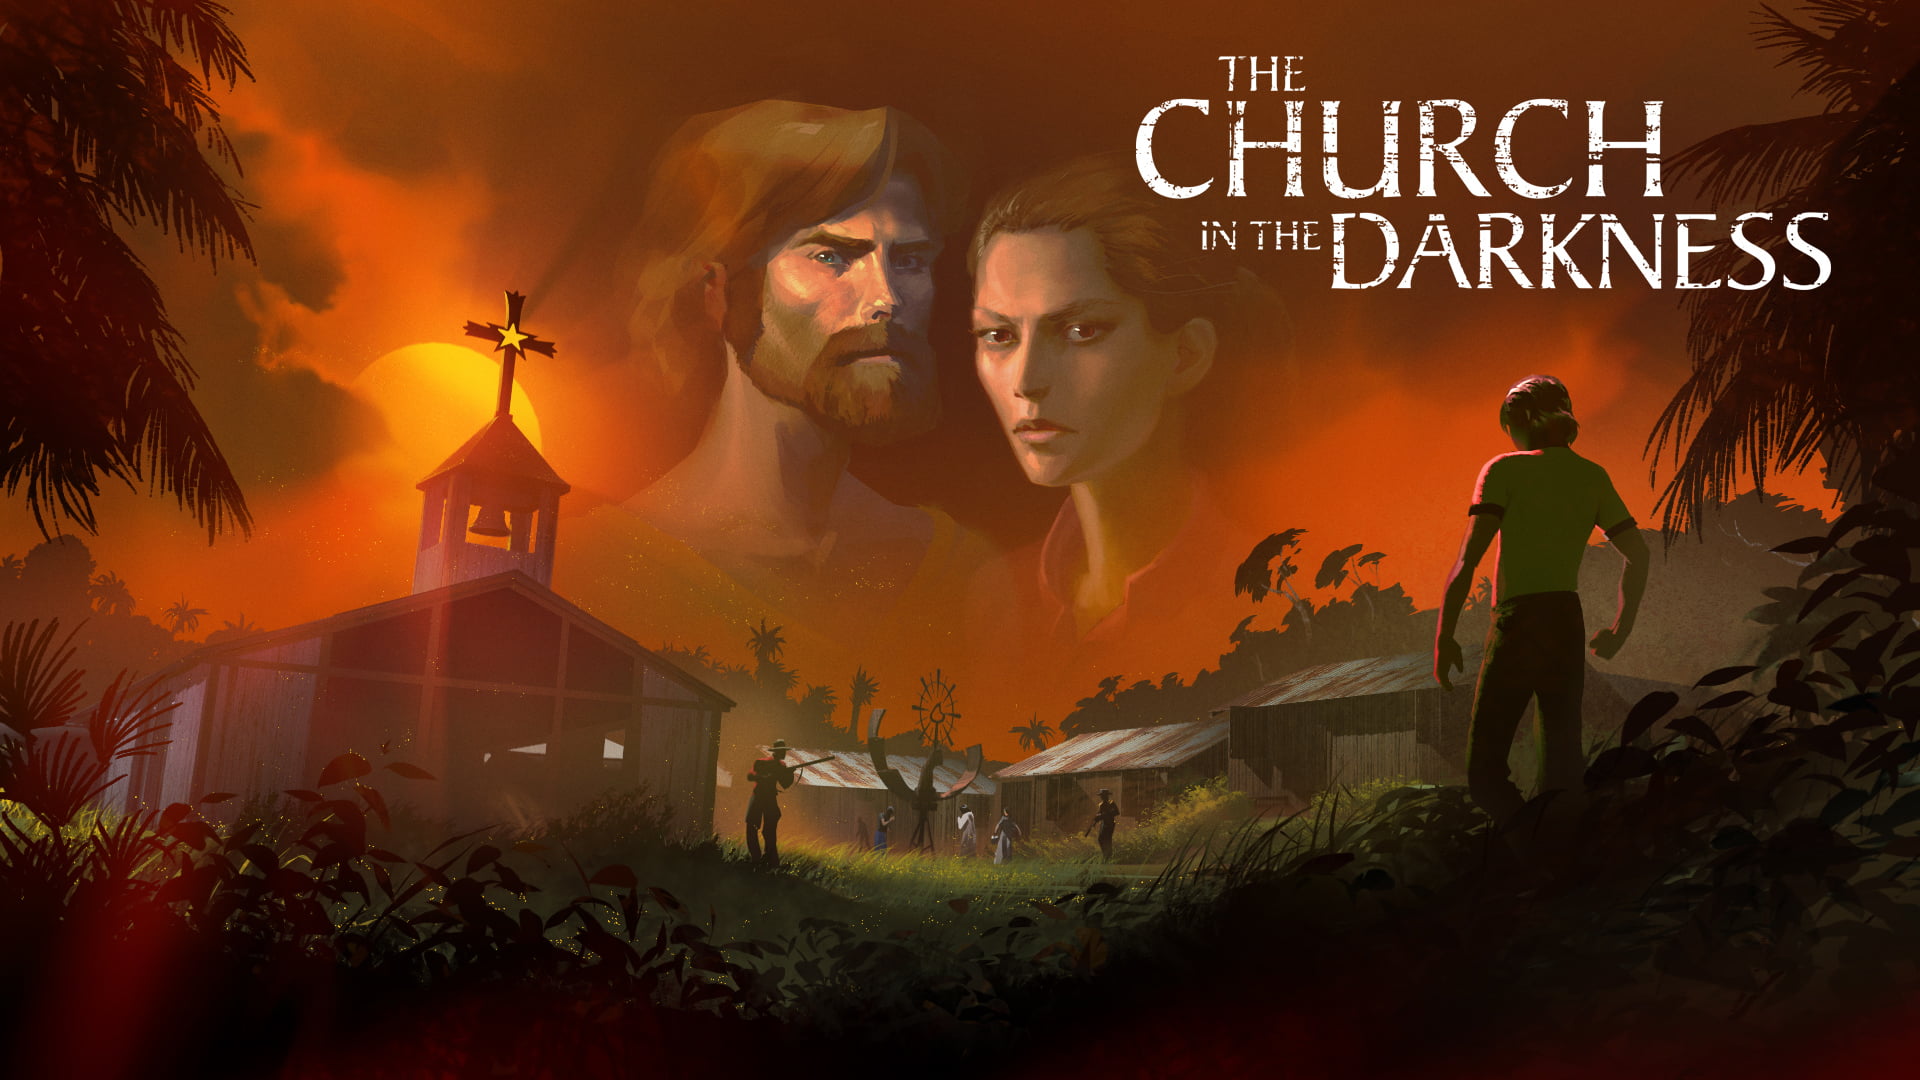 The church in the darkness - review | the church in the darkness | married games tencent | tencent | the church in the darkness